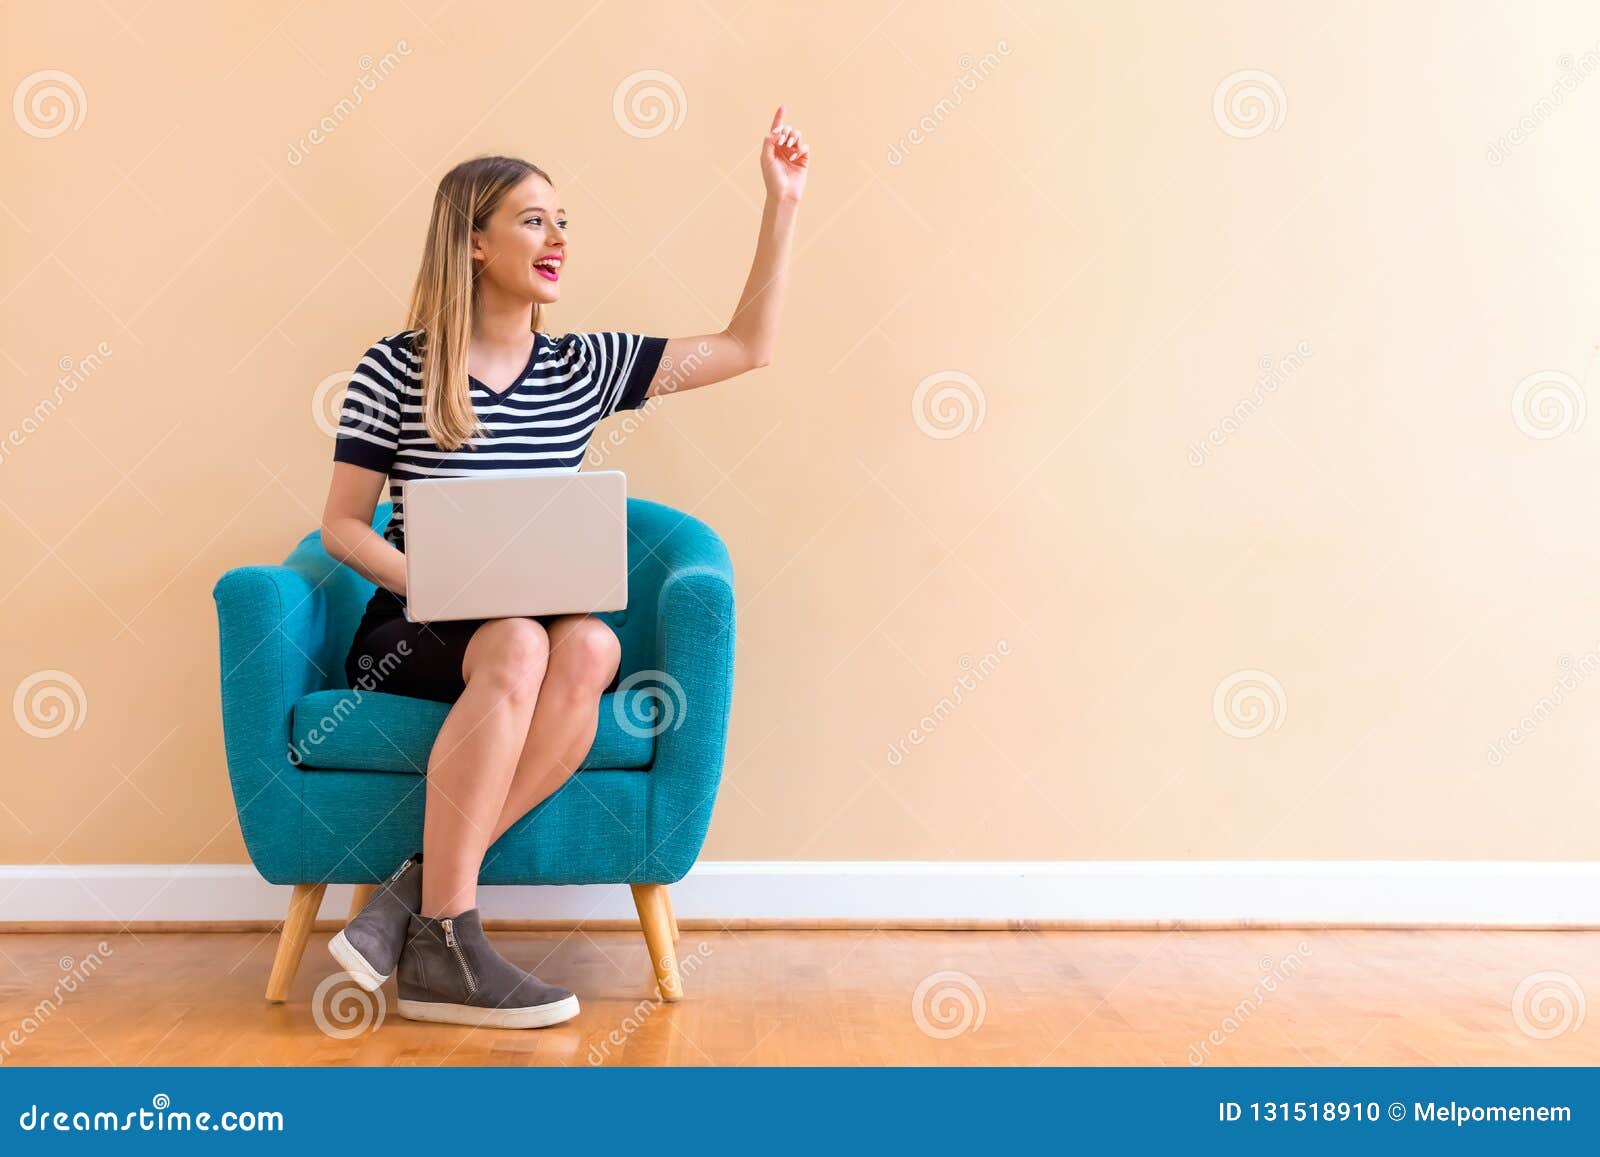 young woman with a laptop computer pointing something